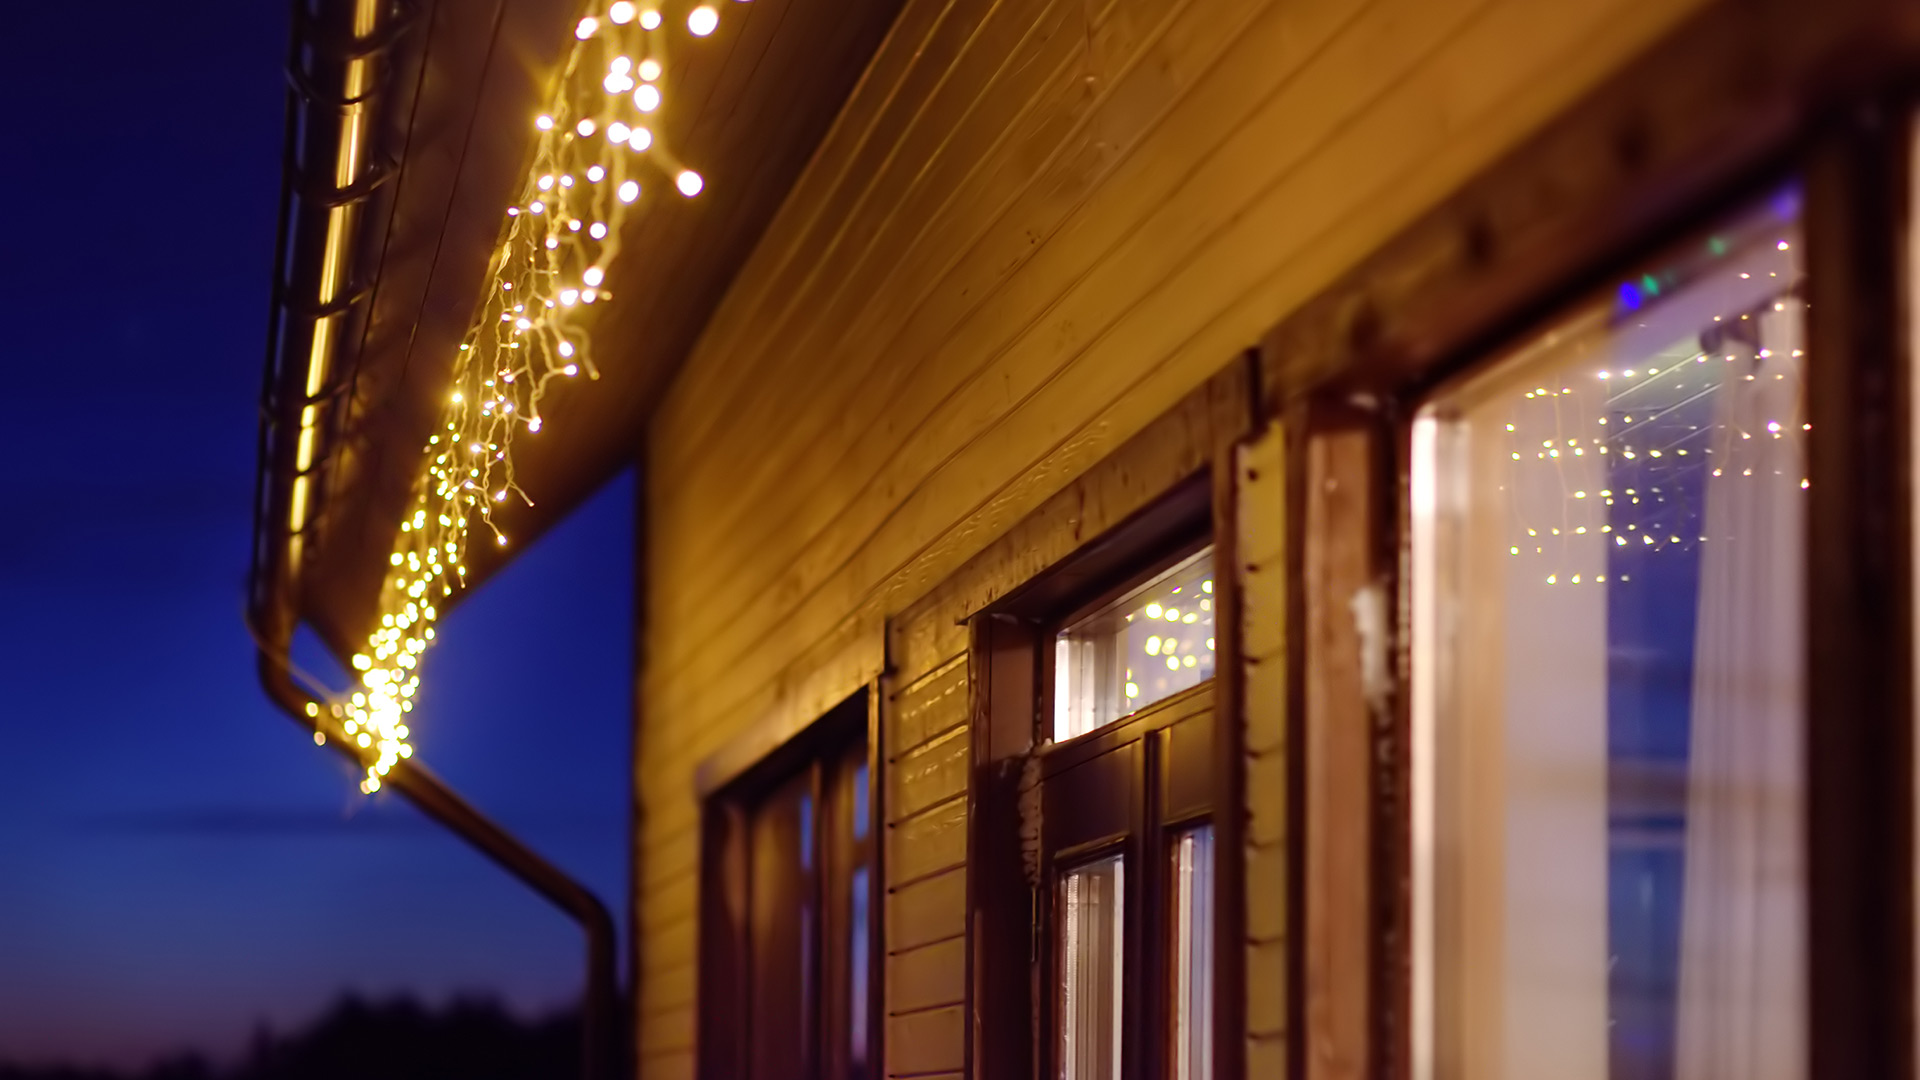 Planning on Hiring Professionals for Your Holiday Lighting? The Time Is Now